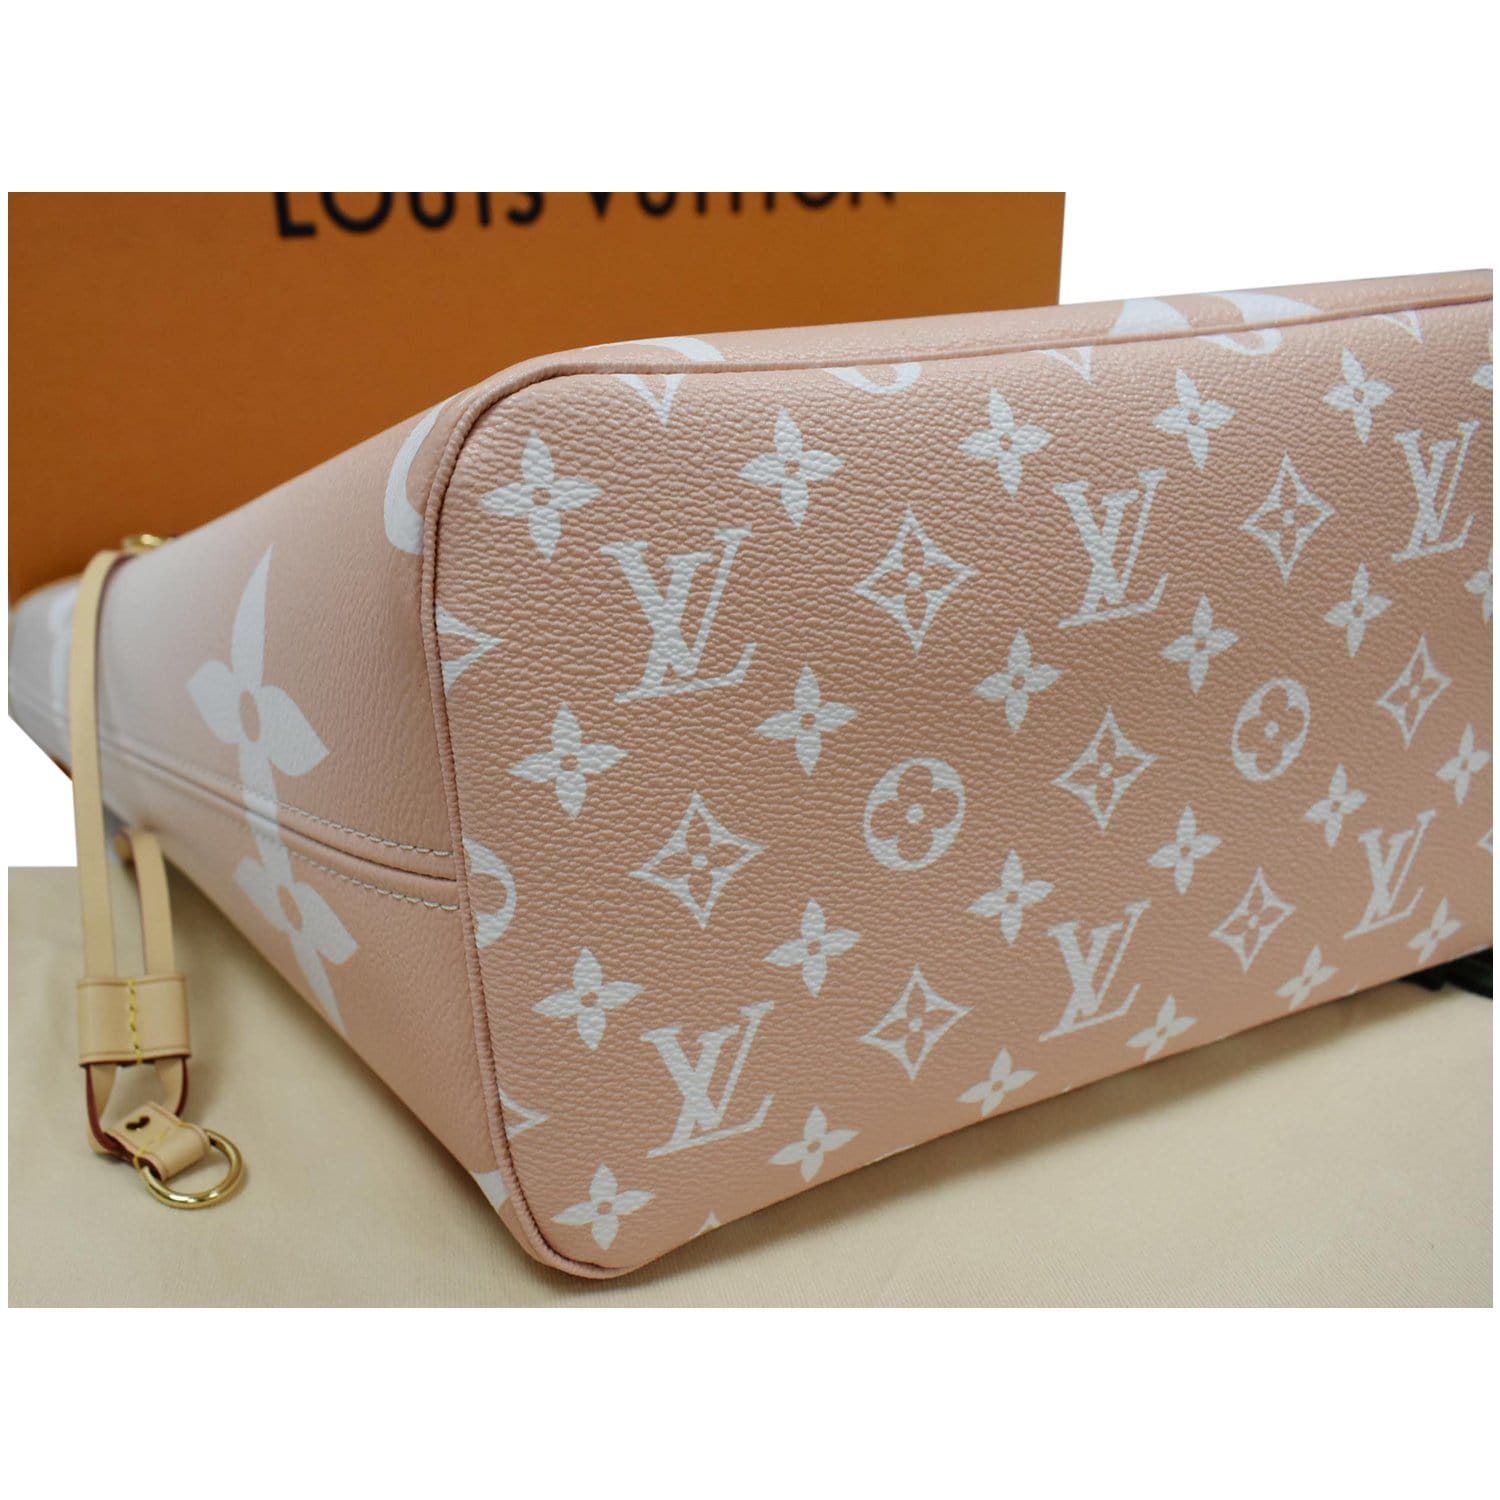 Authenticated used Louis Vuitton Neverfull mm Tote Bag M45679 Monogram Giant/By The Pool, Adult Unisex, Size: (HxWxD): 29cm x 44cm x 16cm / 11.41'' x